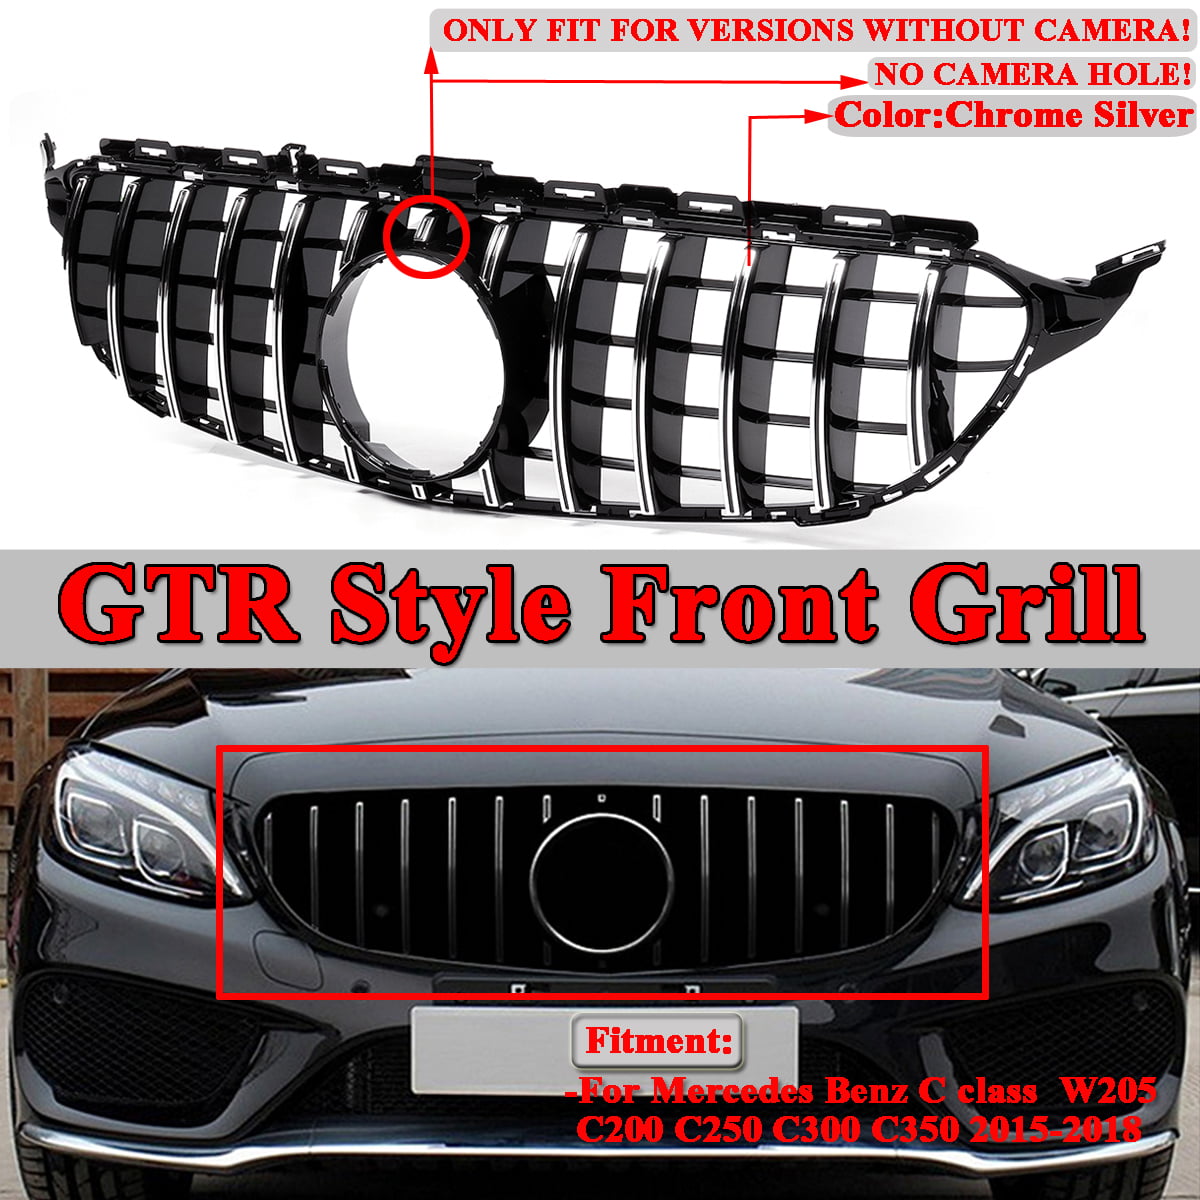 EBDH Bumper Grill W205 GT R for GTR for AMG Car Front Grille for Mercedes for Benz W205 for AMG Appearance C200 C250 C300 C350 2015-2018,Black